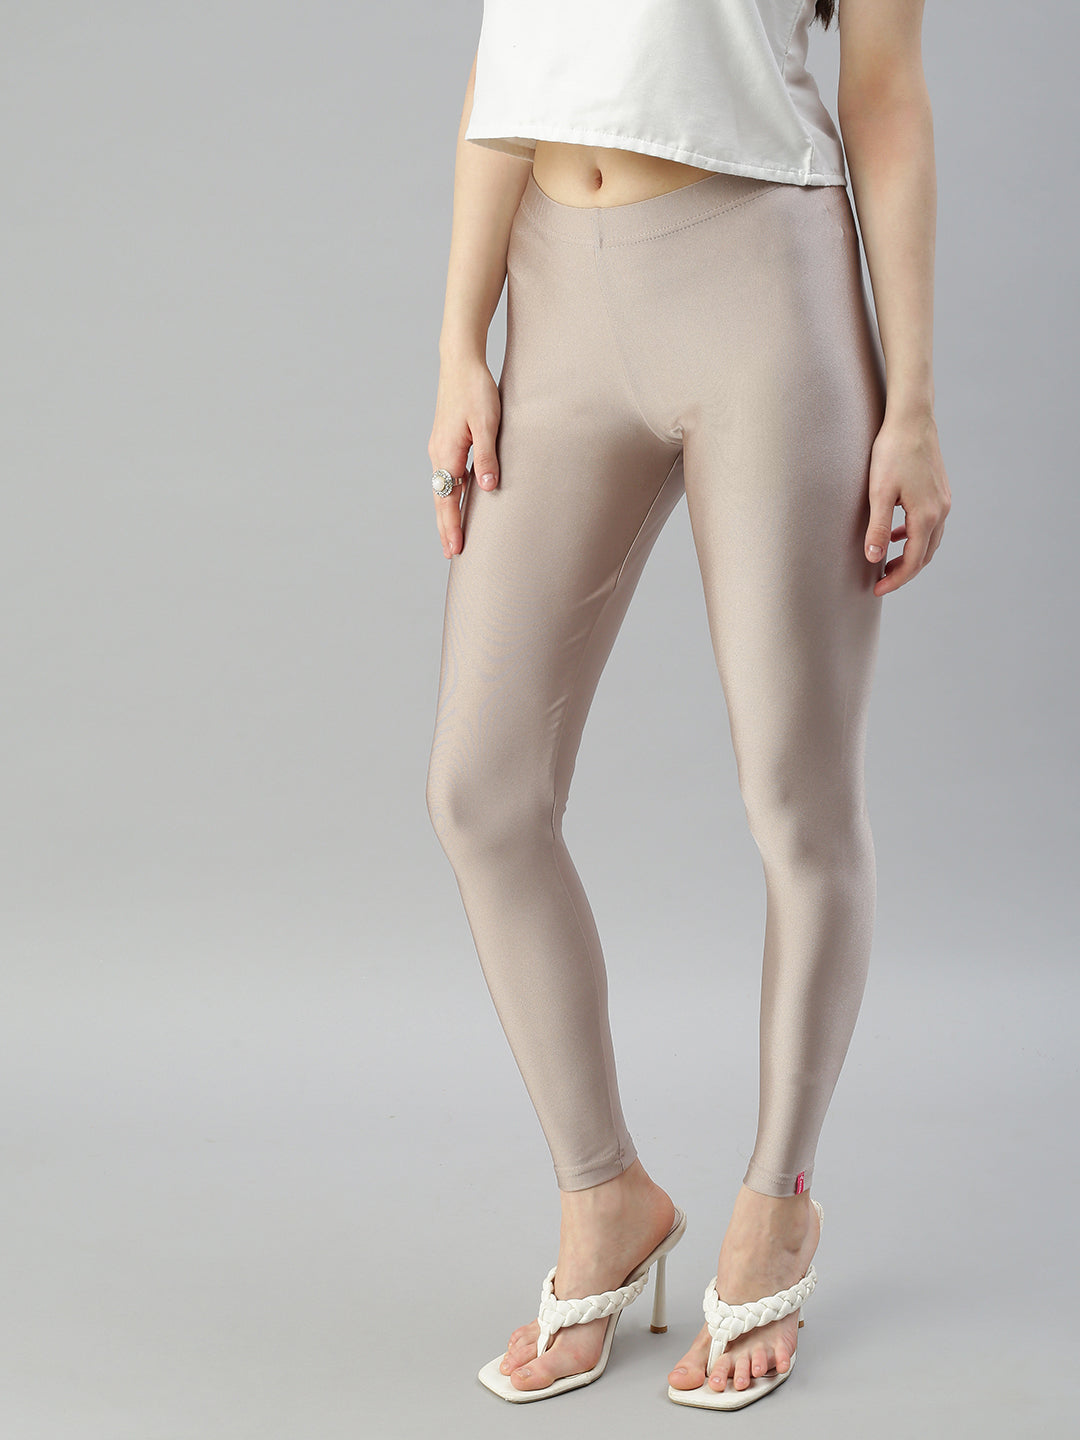 BrandPrisma - Stay stylish and sexy wearing Prisma's readymade tight-fit  shimmer #leggings that is made from high quality nylon stretch fabric. You  can wear this #stylish casual outfit for partying and outing